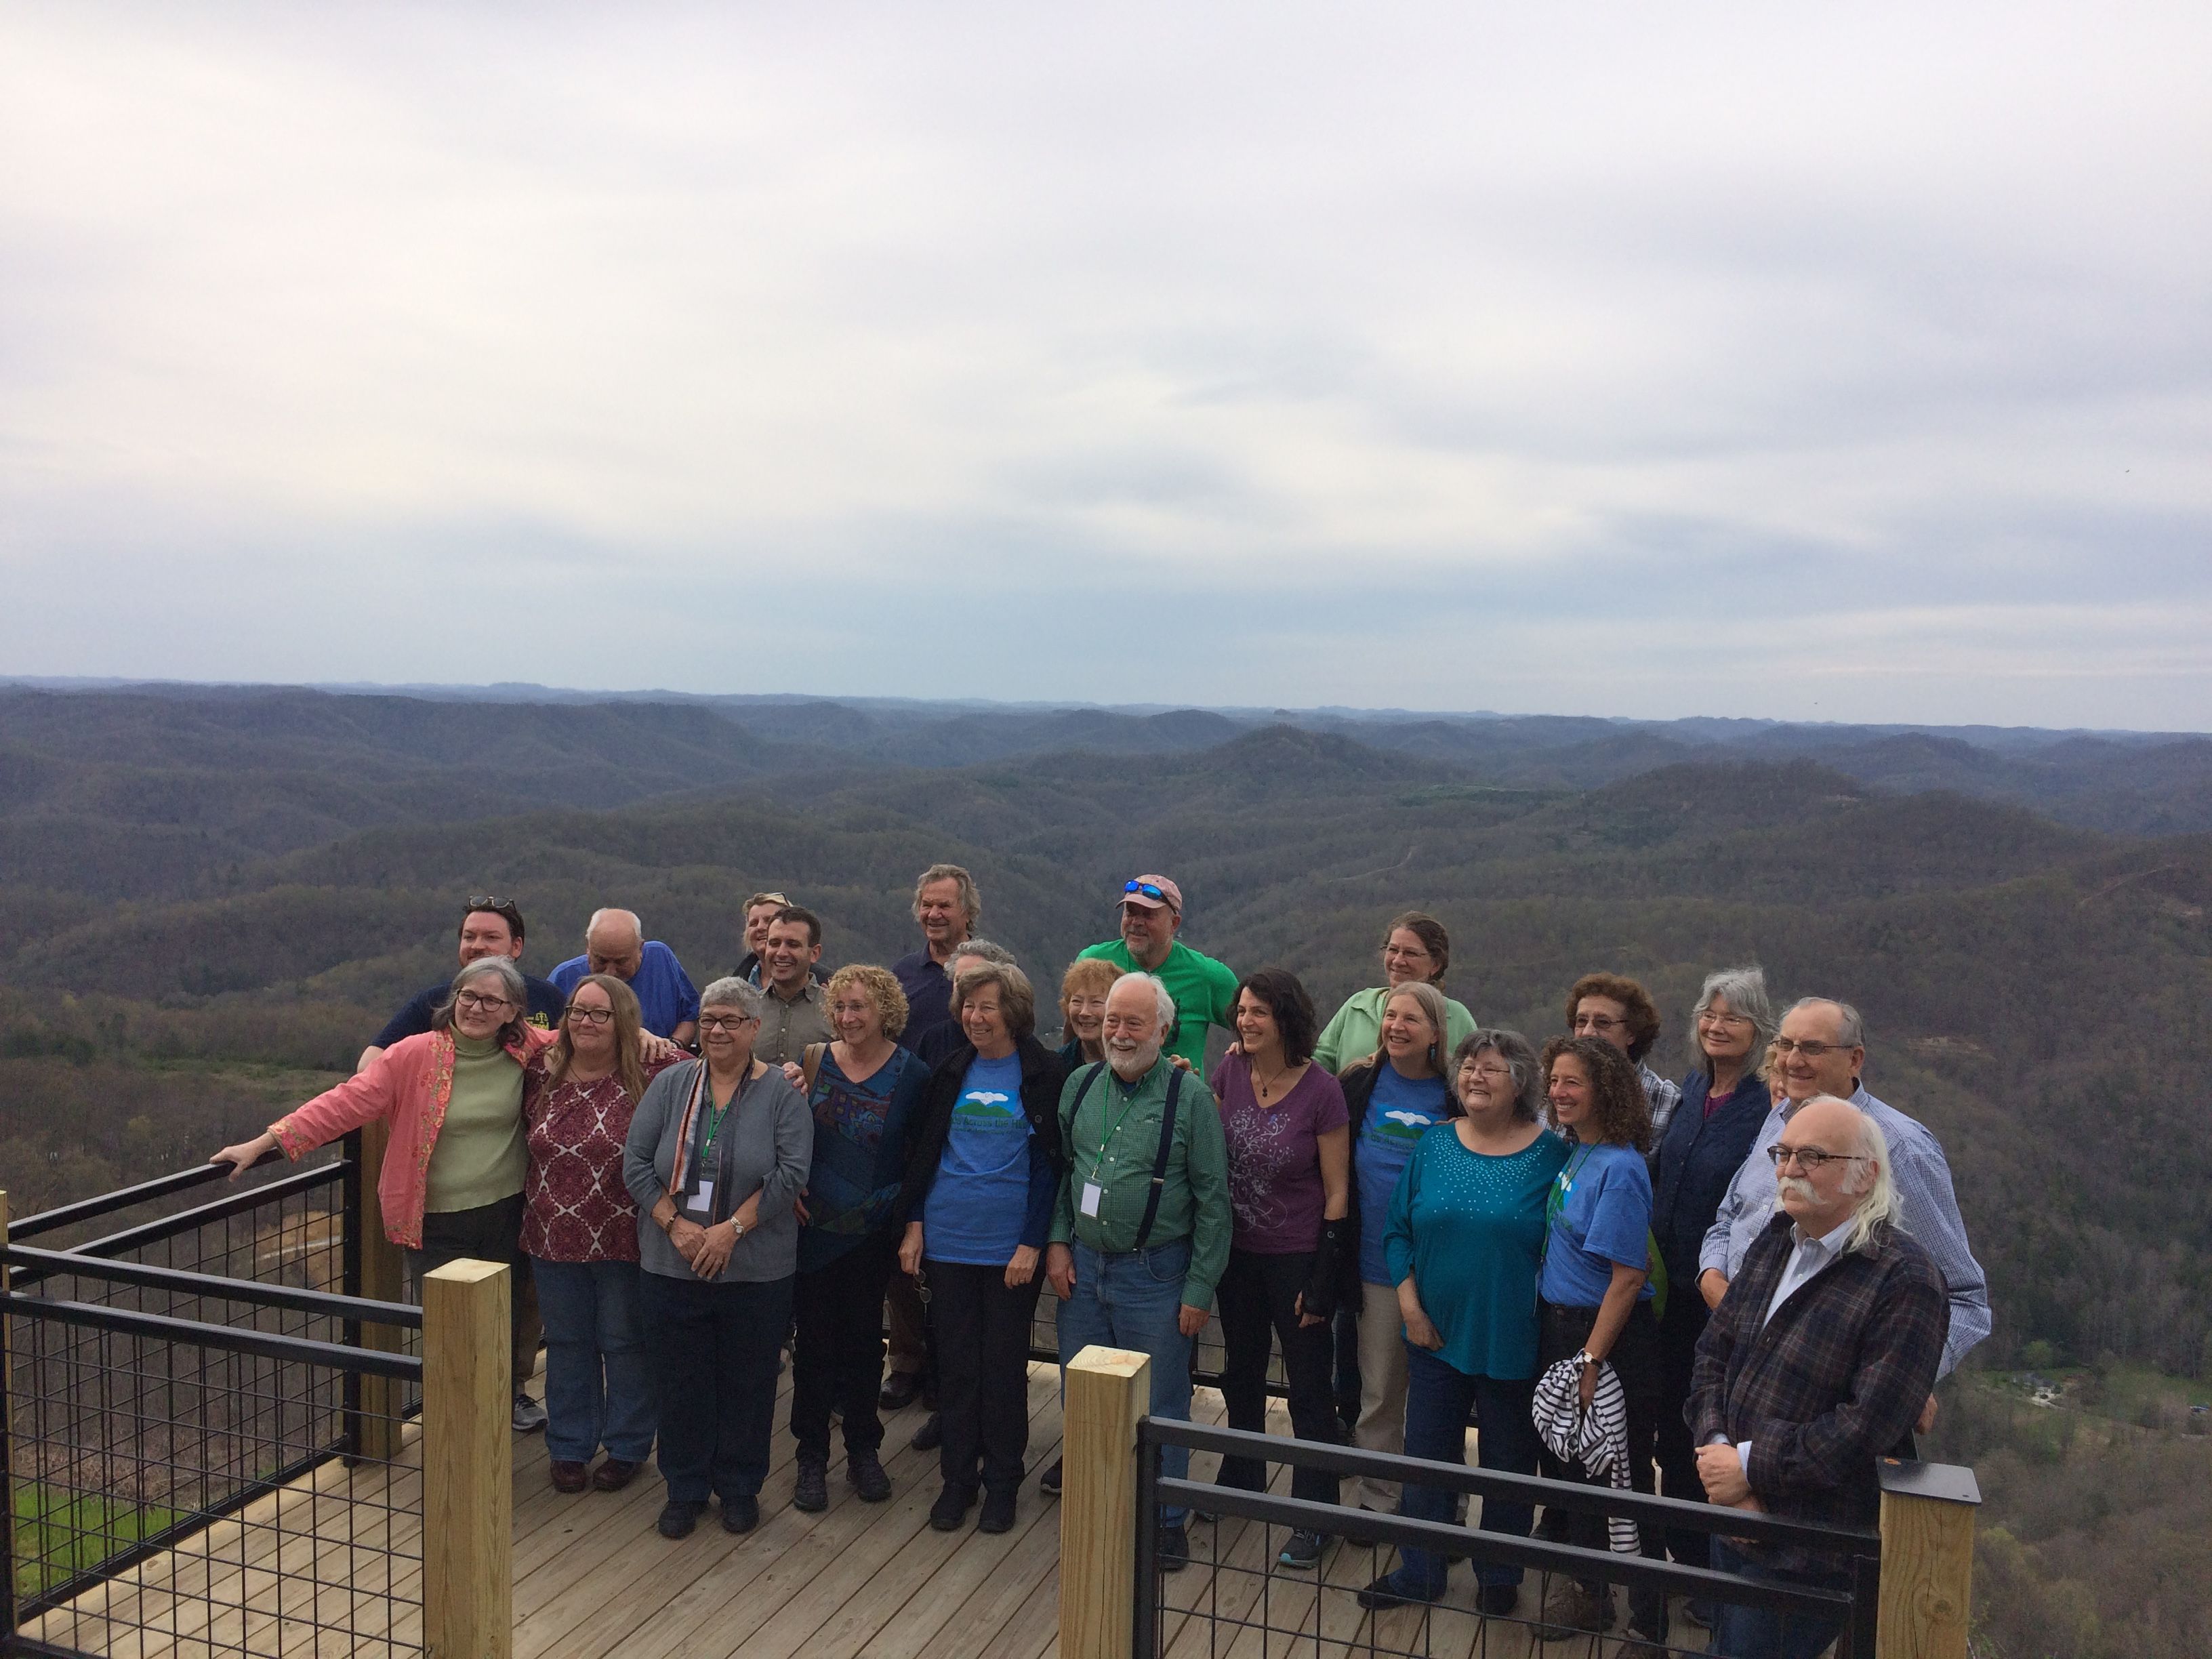 Massachusetts and Kentucky participants share a moment before Hands Across the Hills visit in April ends. Image by Richie Davis. United States, 2018.